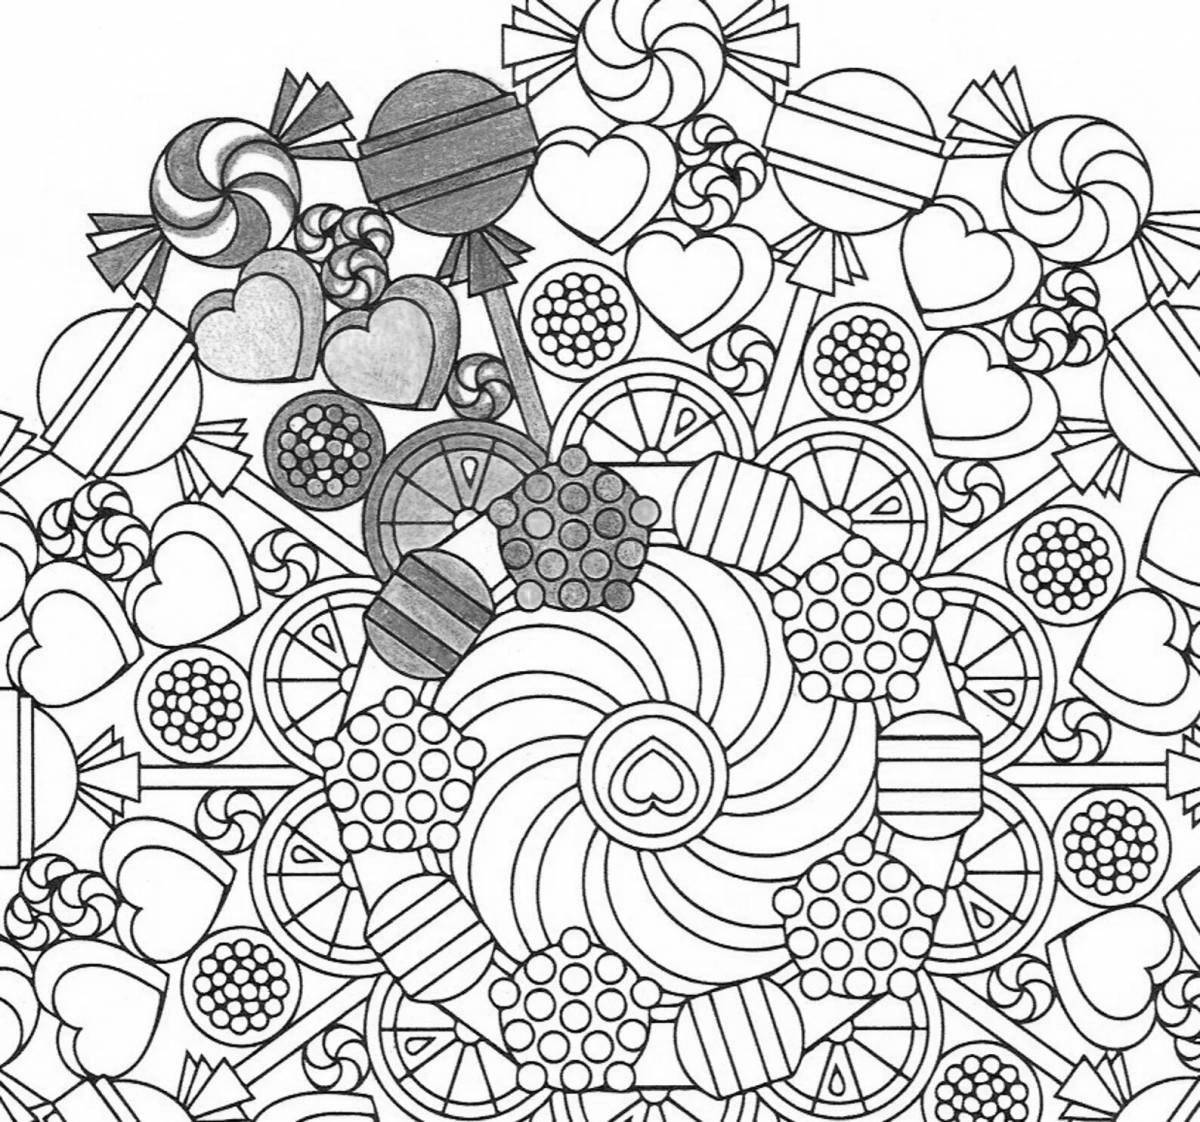 Creative abstract coloring book